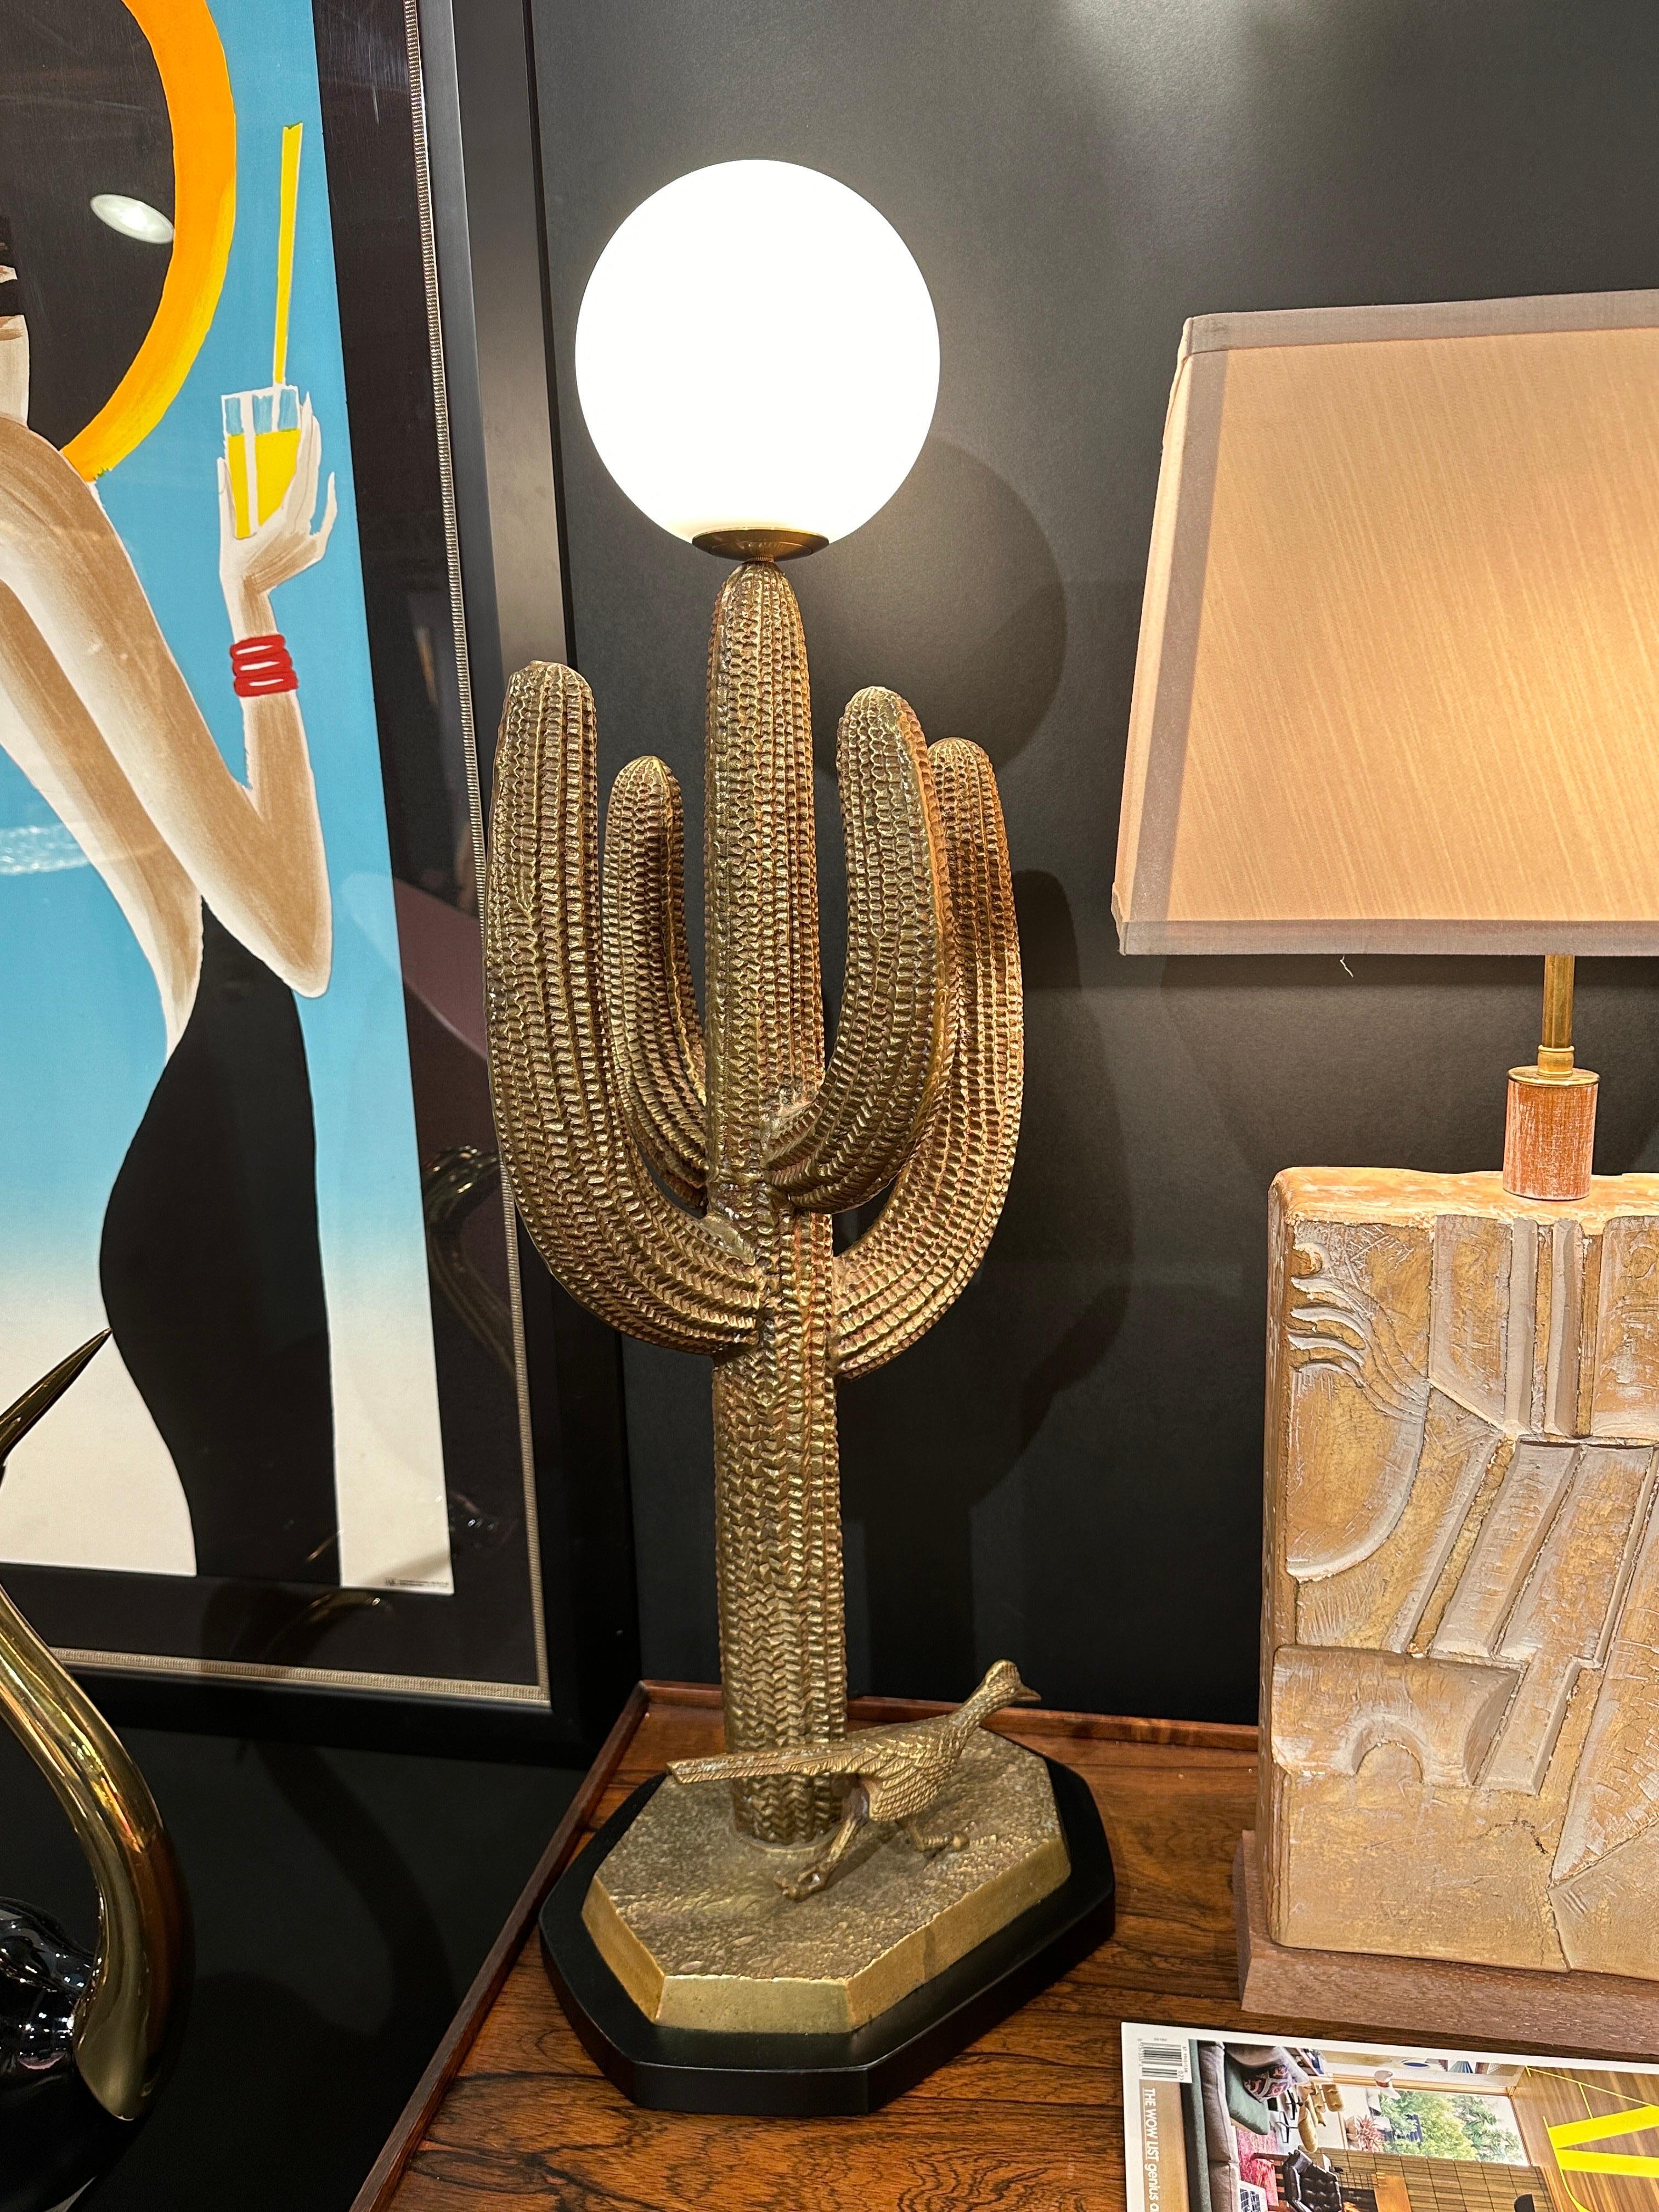 Brass saguaro cactus and roadrunner sculpture from 1970’s mounted as lamps. Only brass cactus is 29